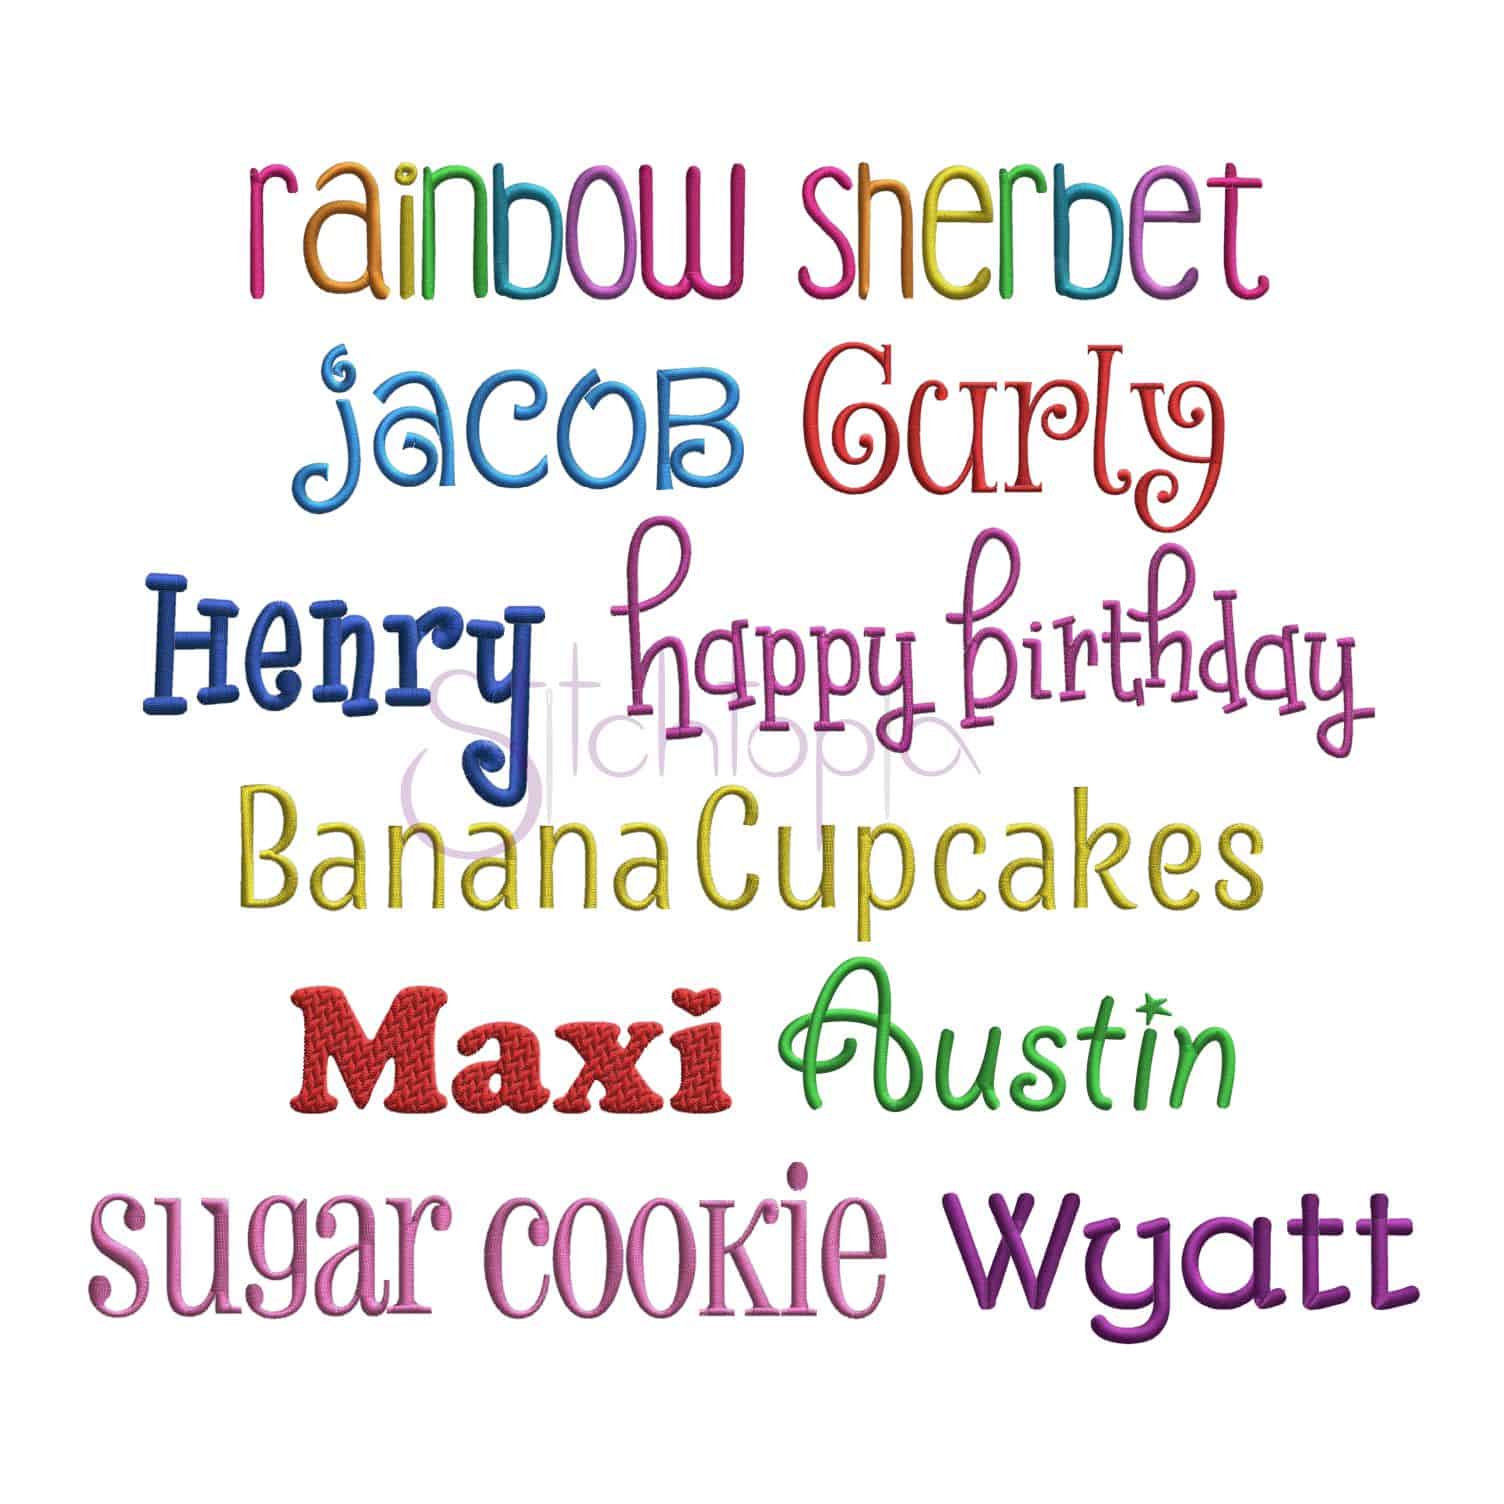 Kids Font Pack #2-10 Different Machine Embroidery Fonts 3 Sizes Each